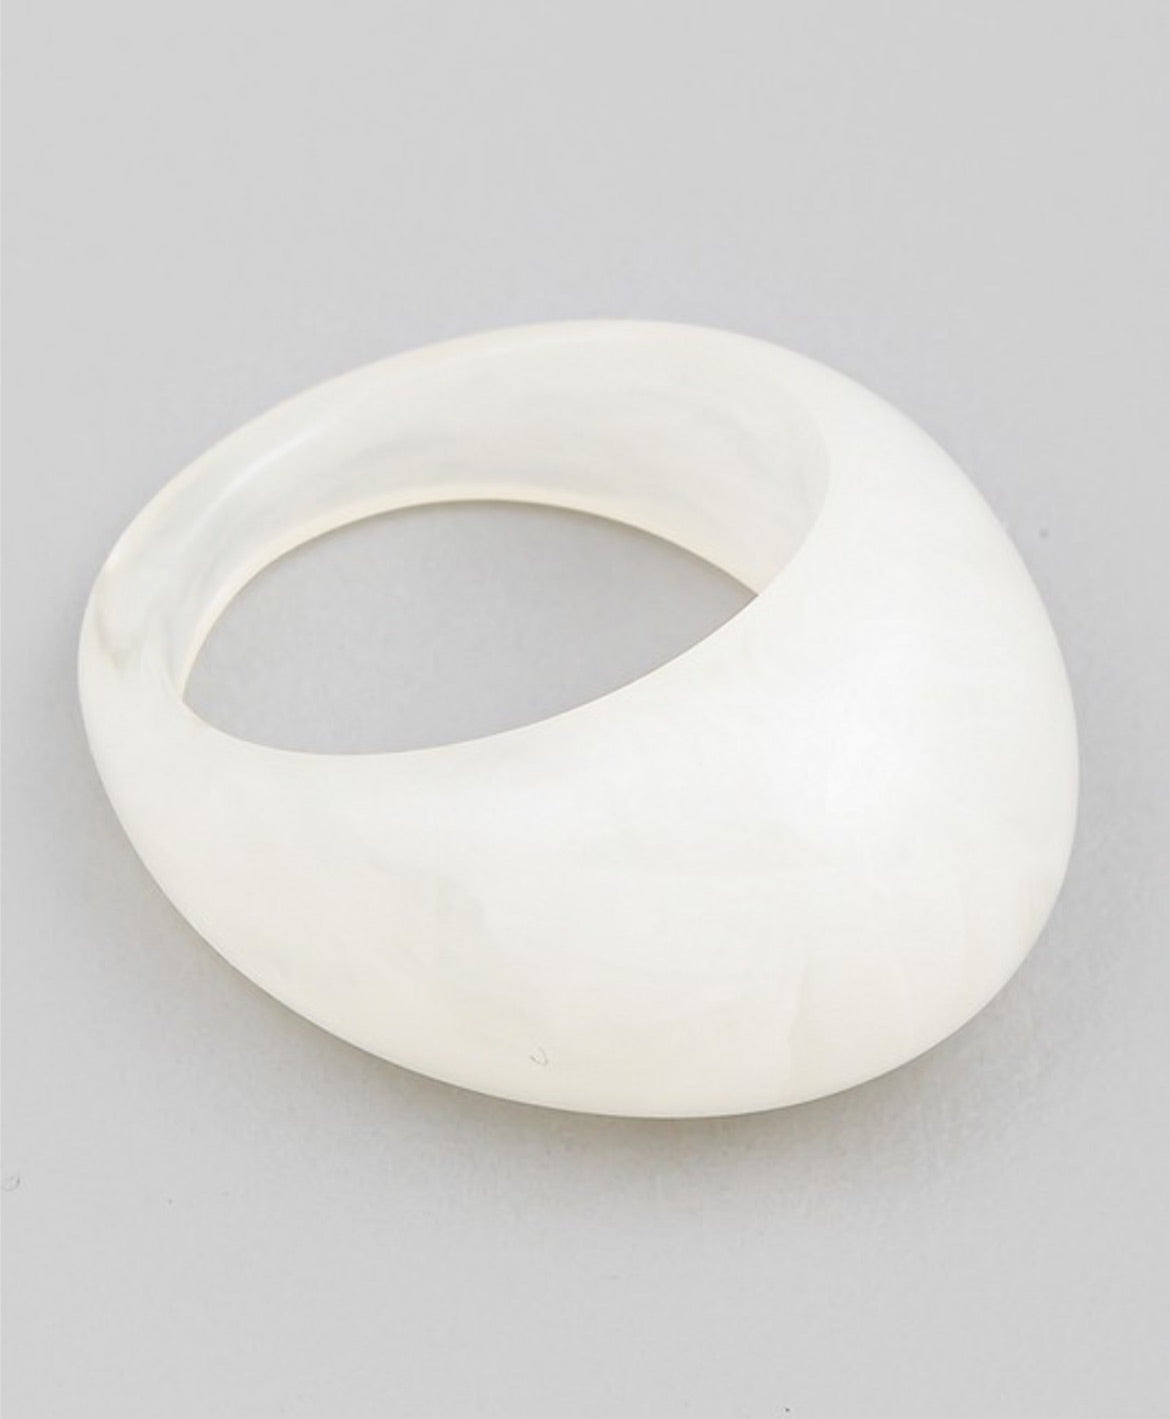 Solid Dome Resin Ring